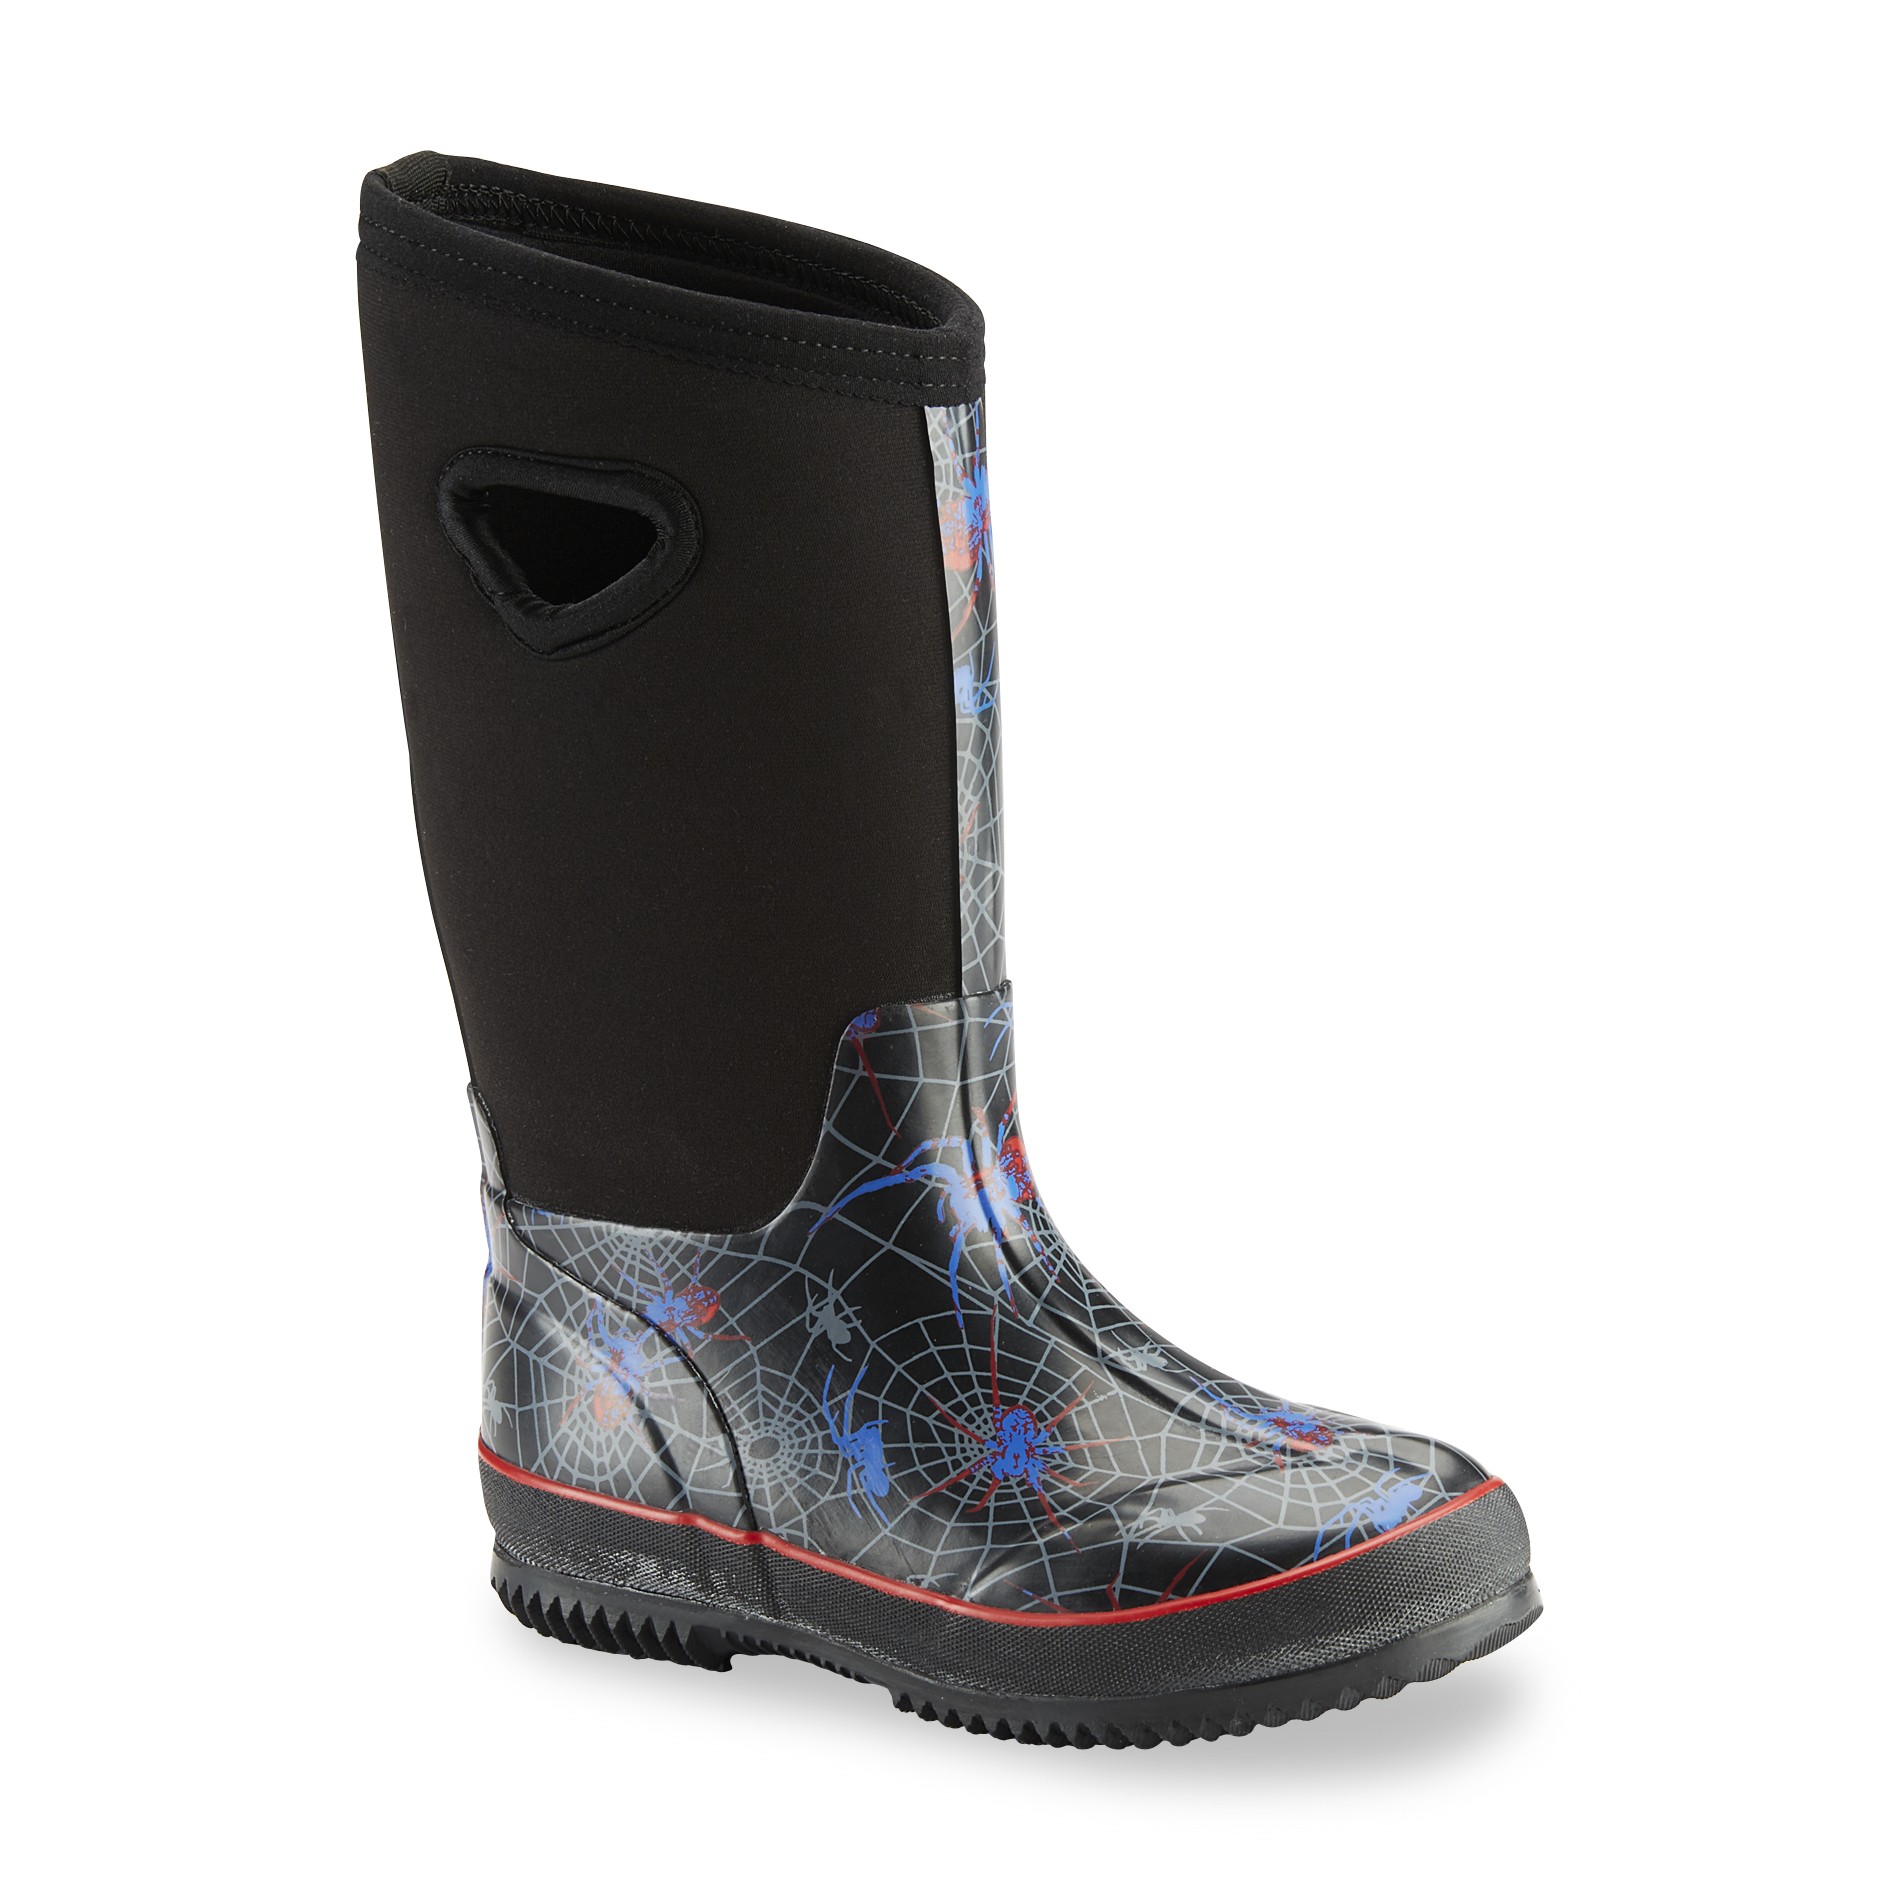 Athletech Boy's Bobby Black/Spiders Weather Boot